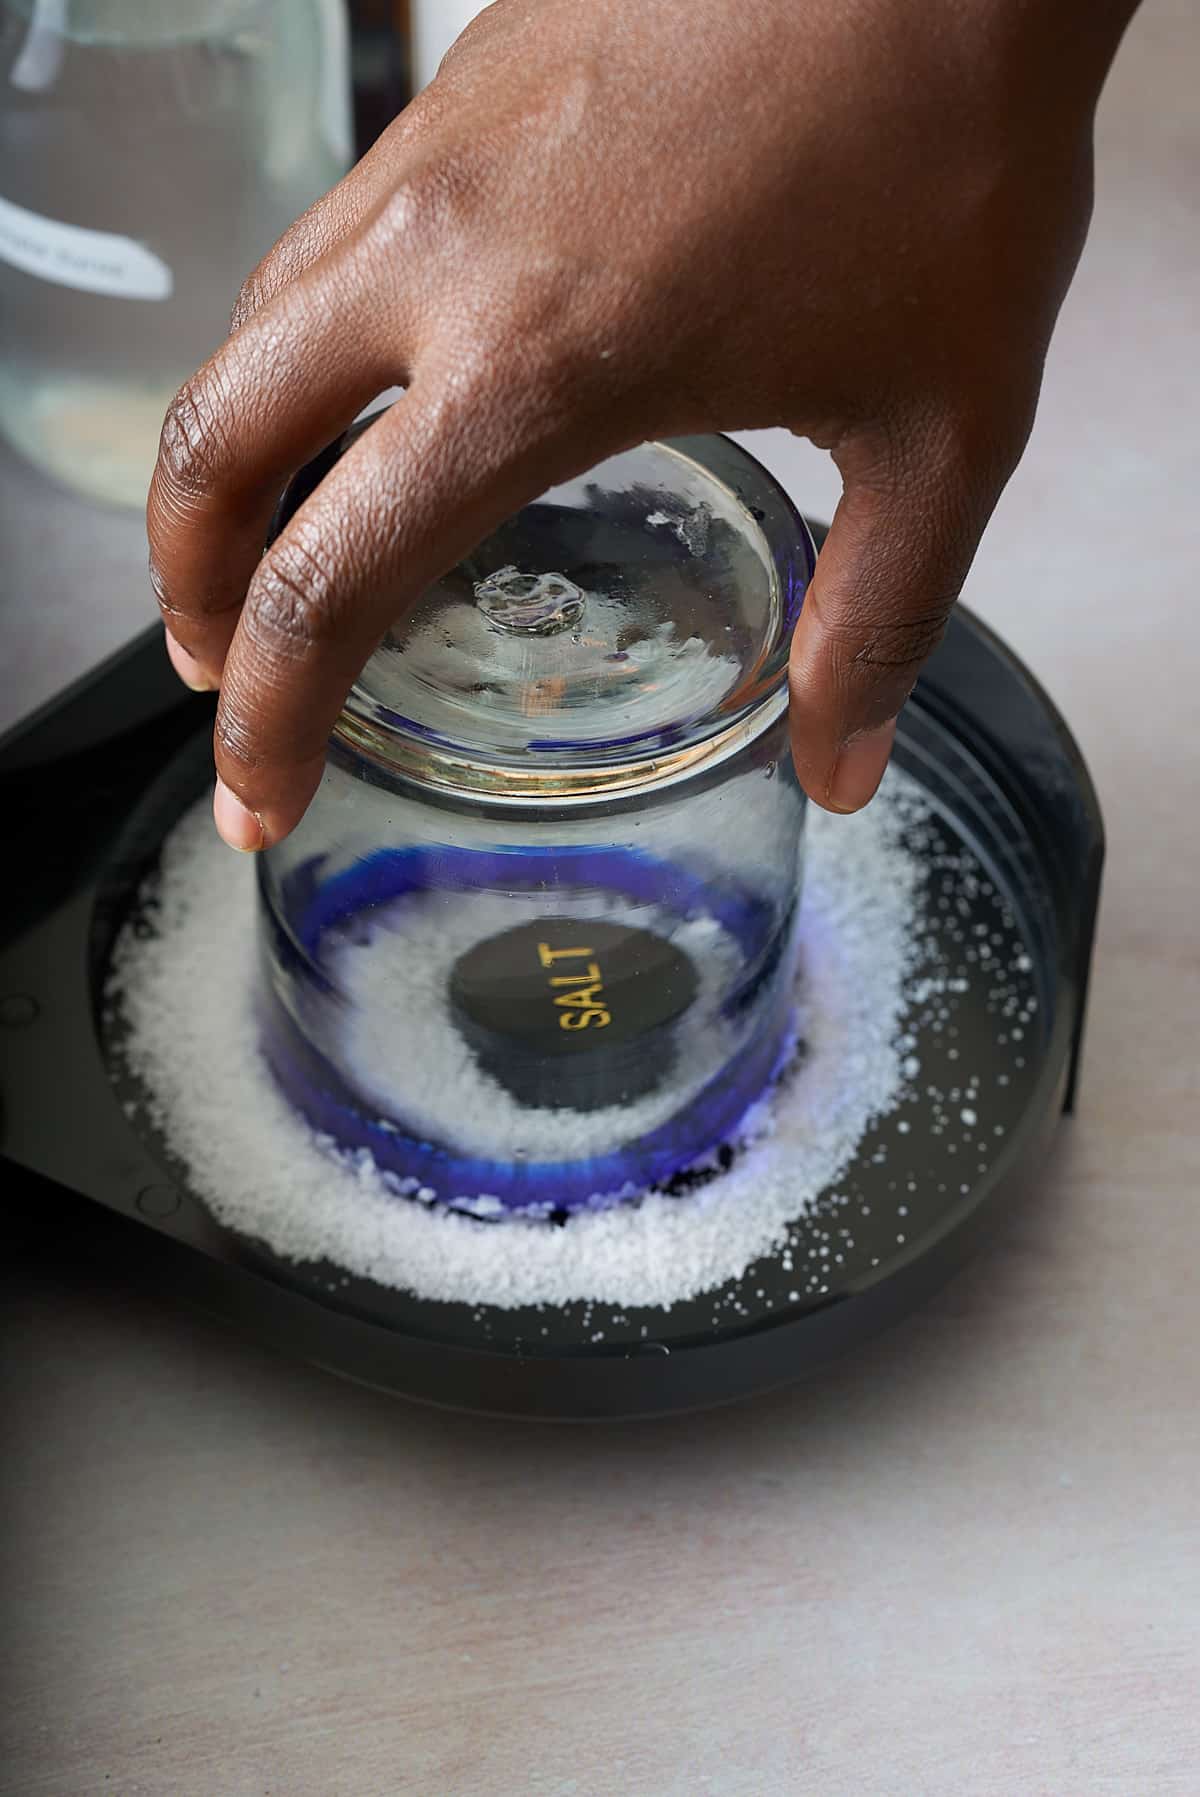 the rim of a glass being dipped into a shallow black dish of coarse salt